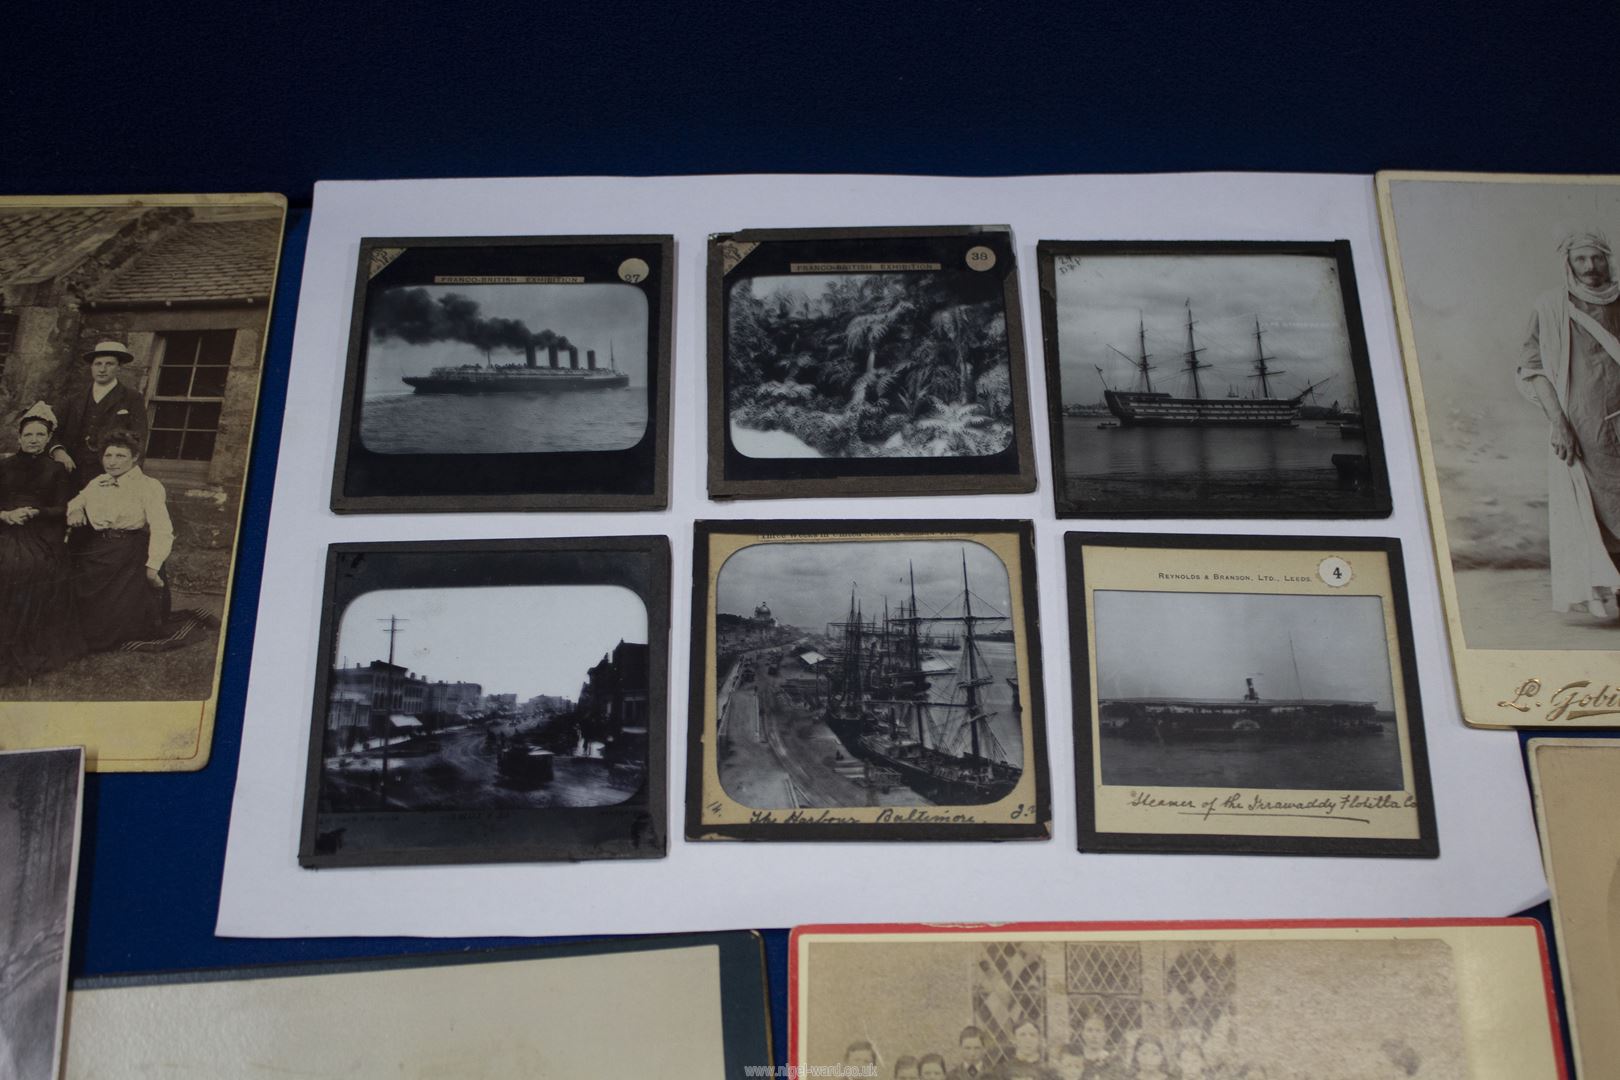 Three Australian cabinet Photographs by Matthew and Poul Poulsen of Brisbane, - Image 2 of 2